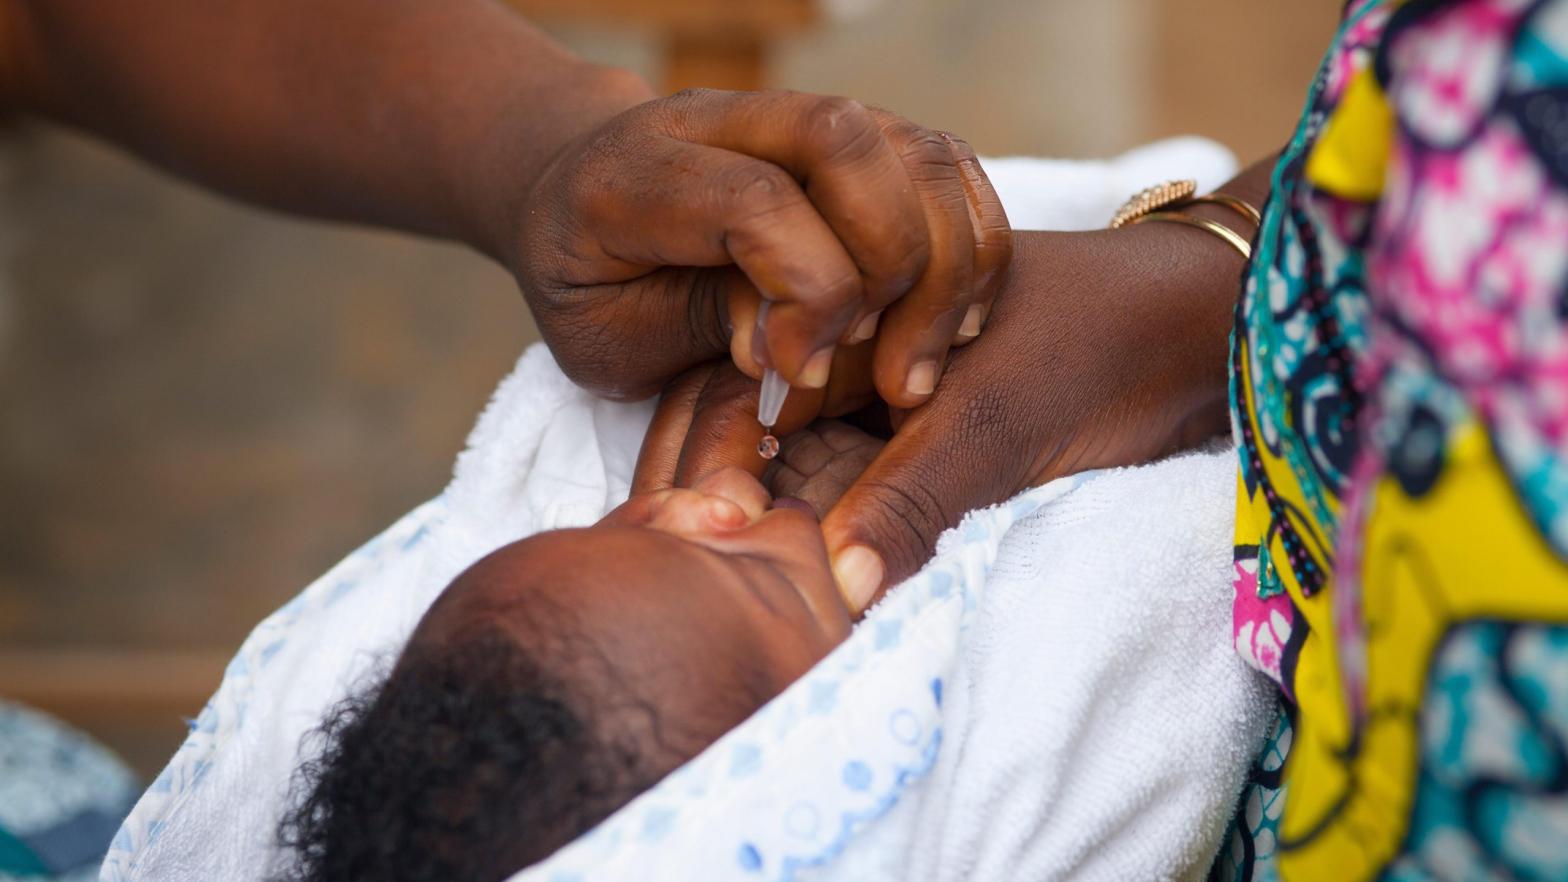 A child getting the oral polio vaccine at a health centre in Lome, Togo. (Photo: BSIP/Universal Images Group, Getty Images)